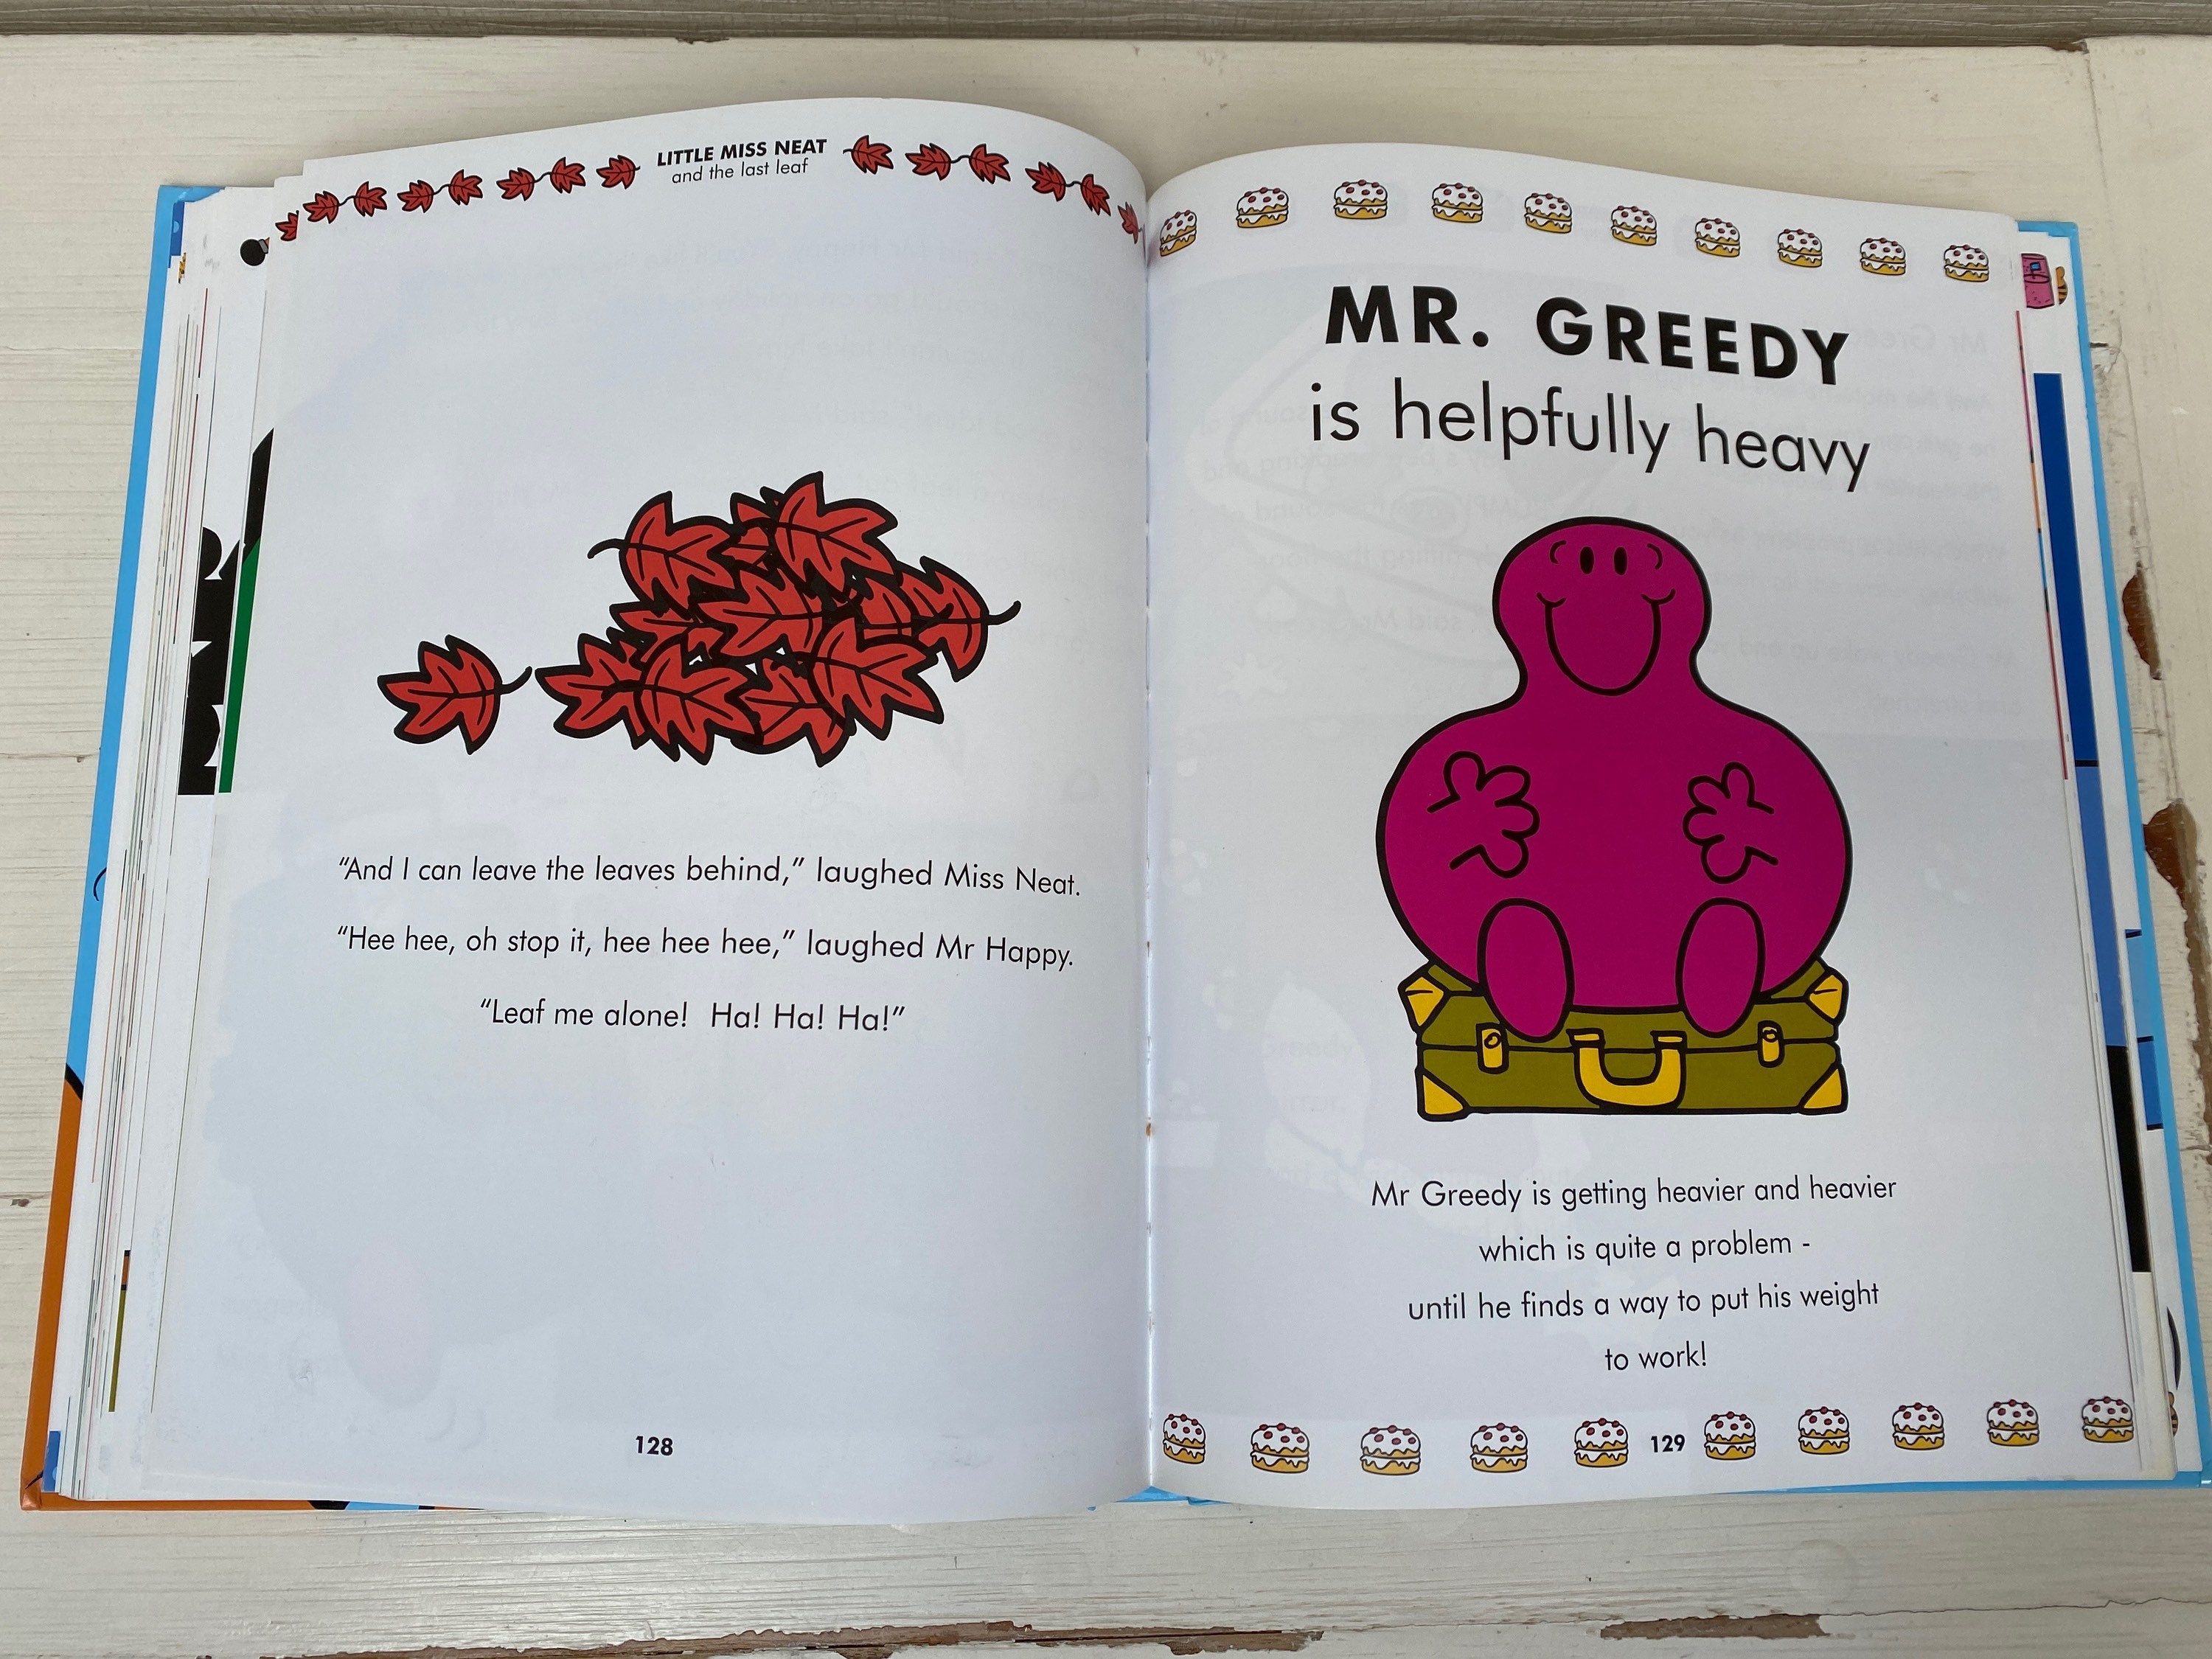 Book Reviews for Mr. Greedy By Roger Hargreaves